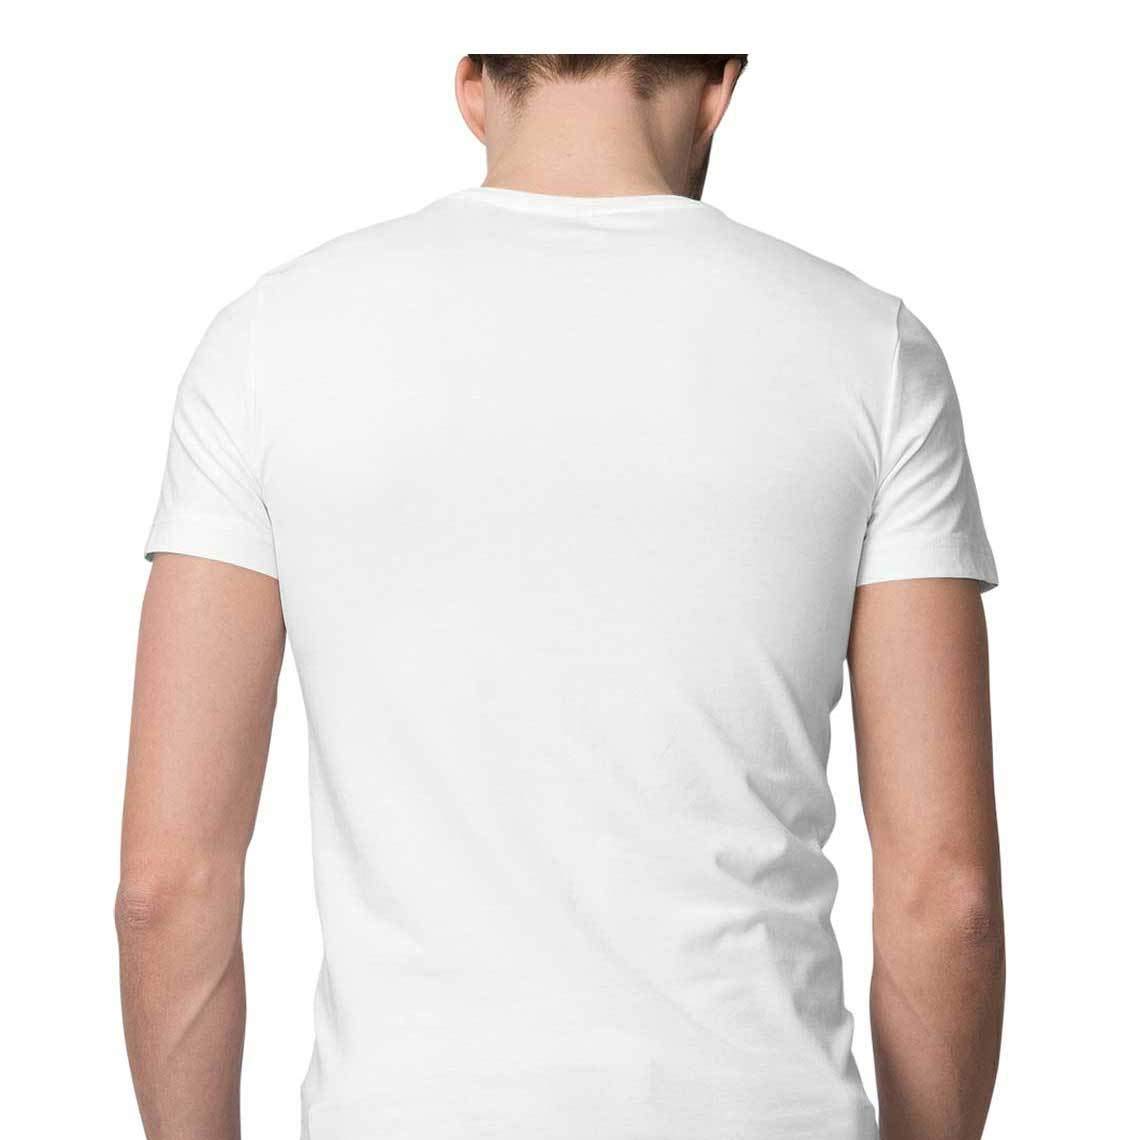 Fathers day Printed Tshirt for Men|Graphic Printed White t shirts for dads|Superdad